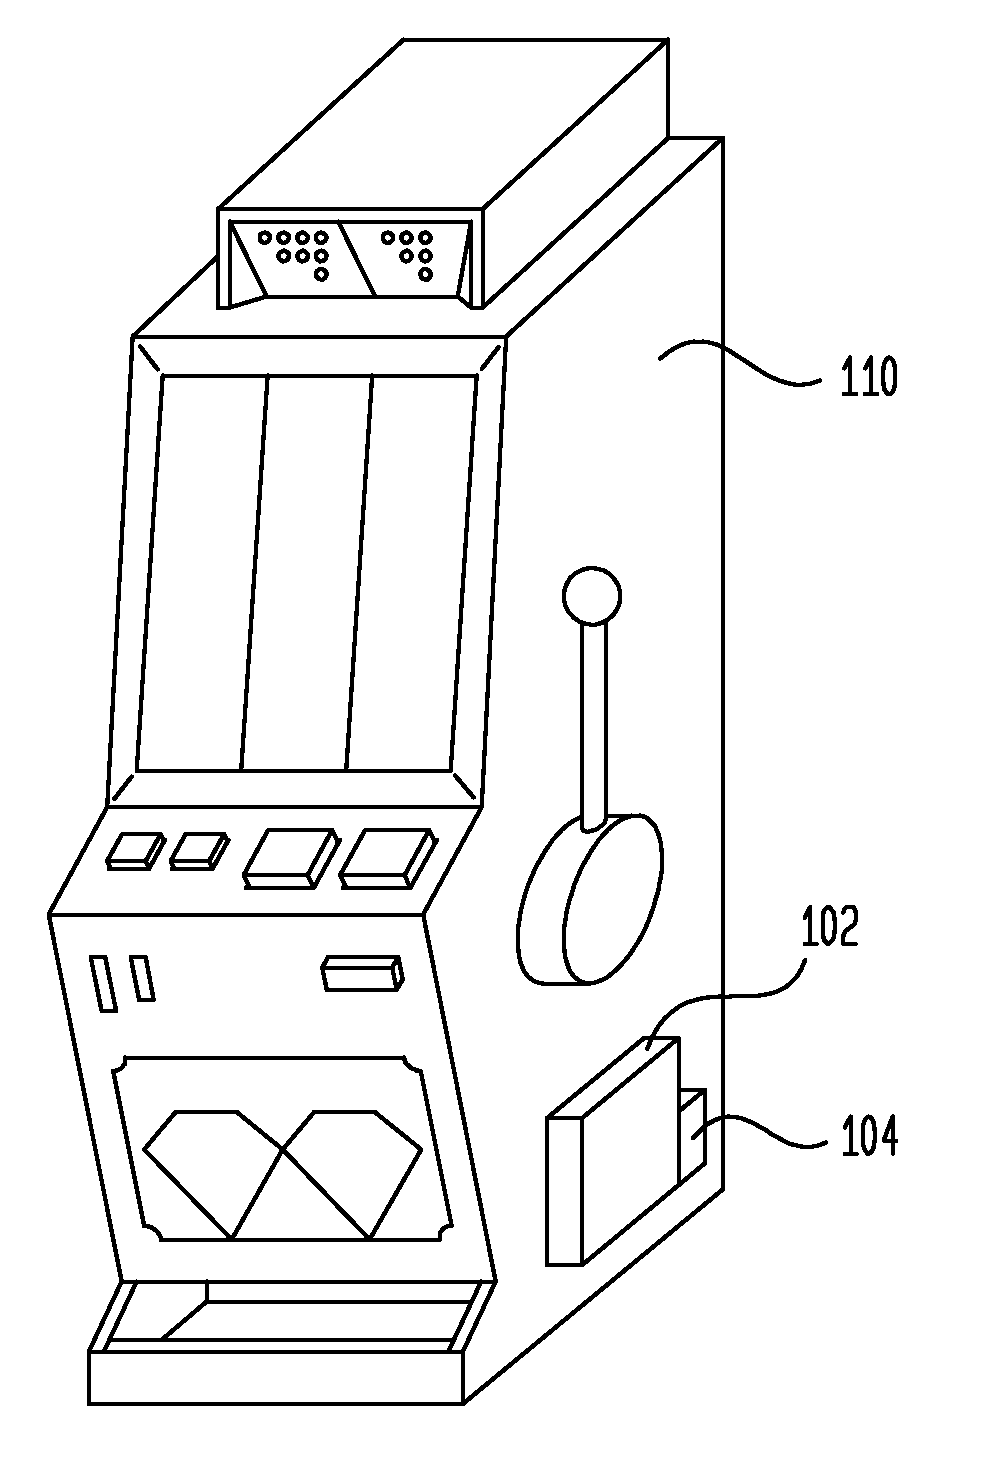 Distributed air cleaner system for enclosed electronic devices